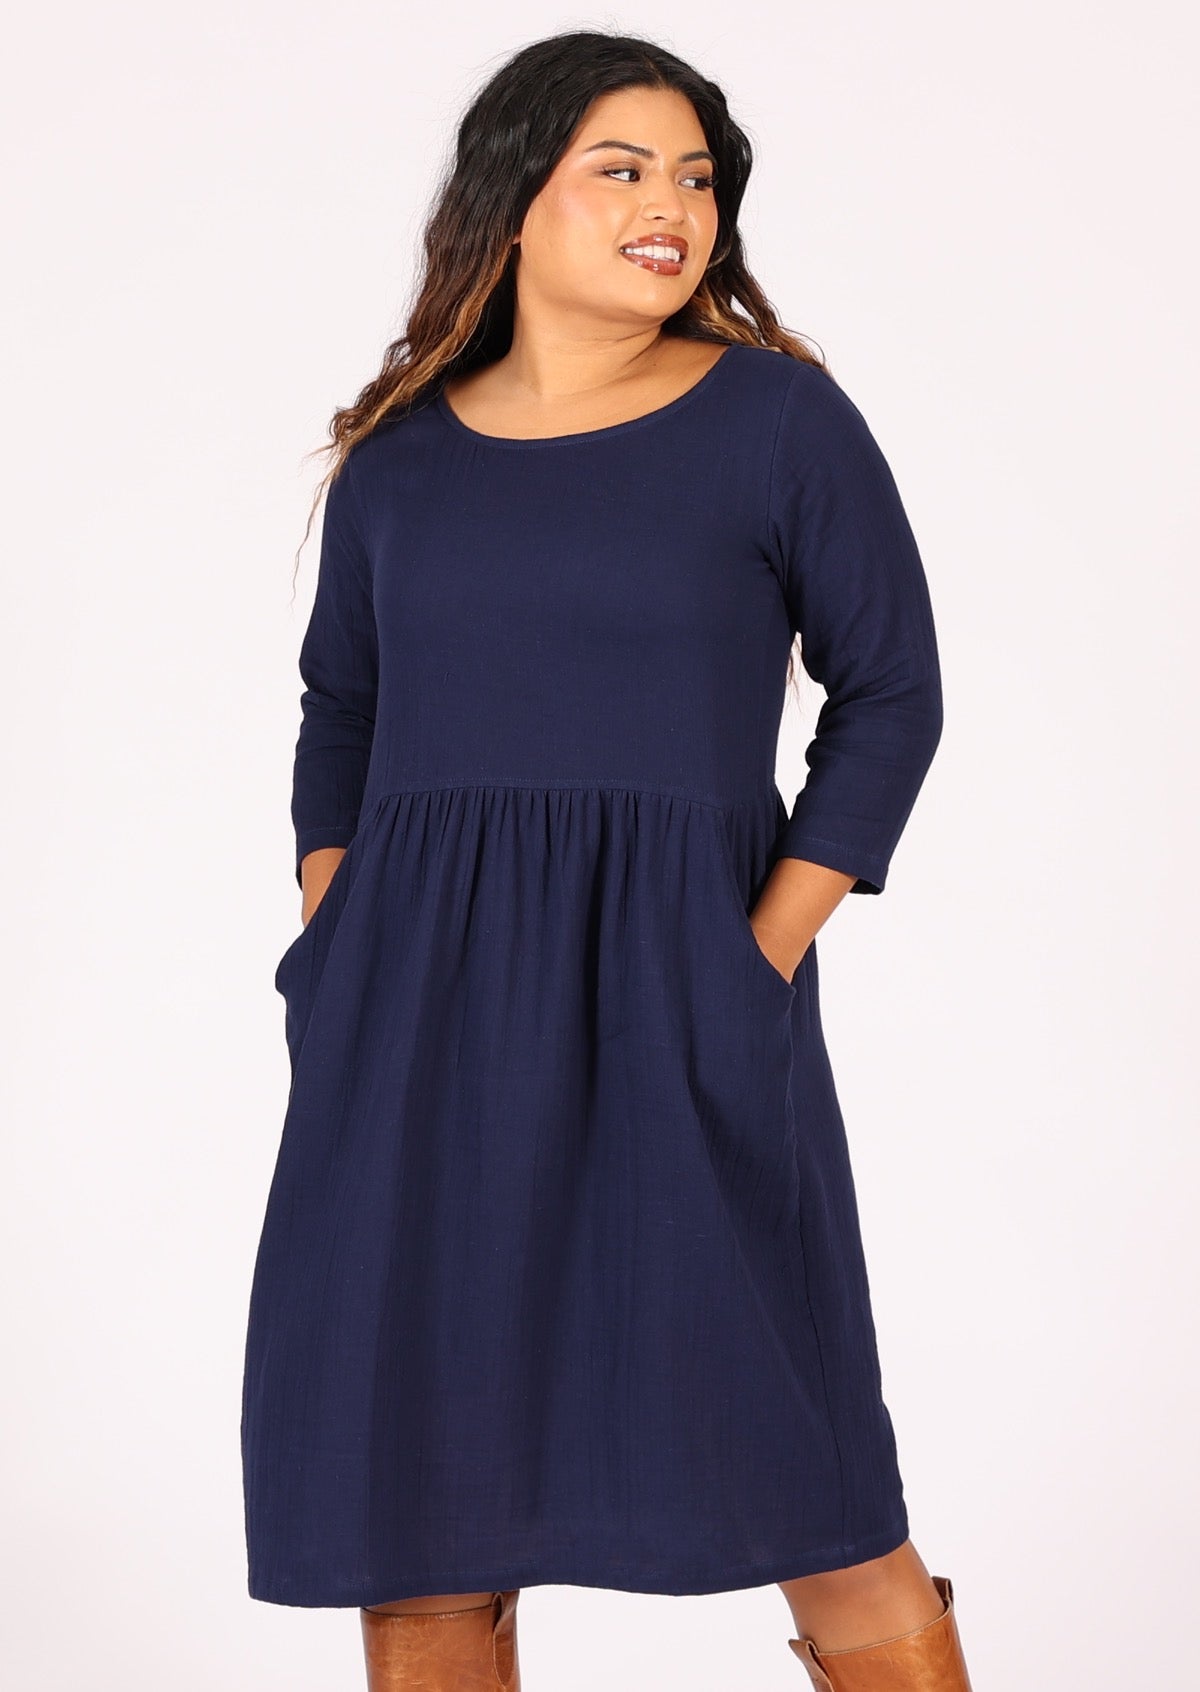 Double layer of cotton gauze dress with round neckline and pockets